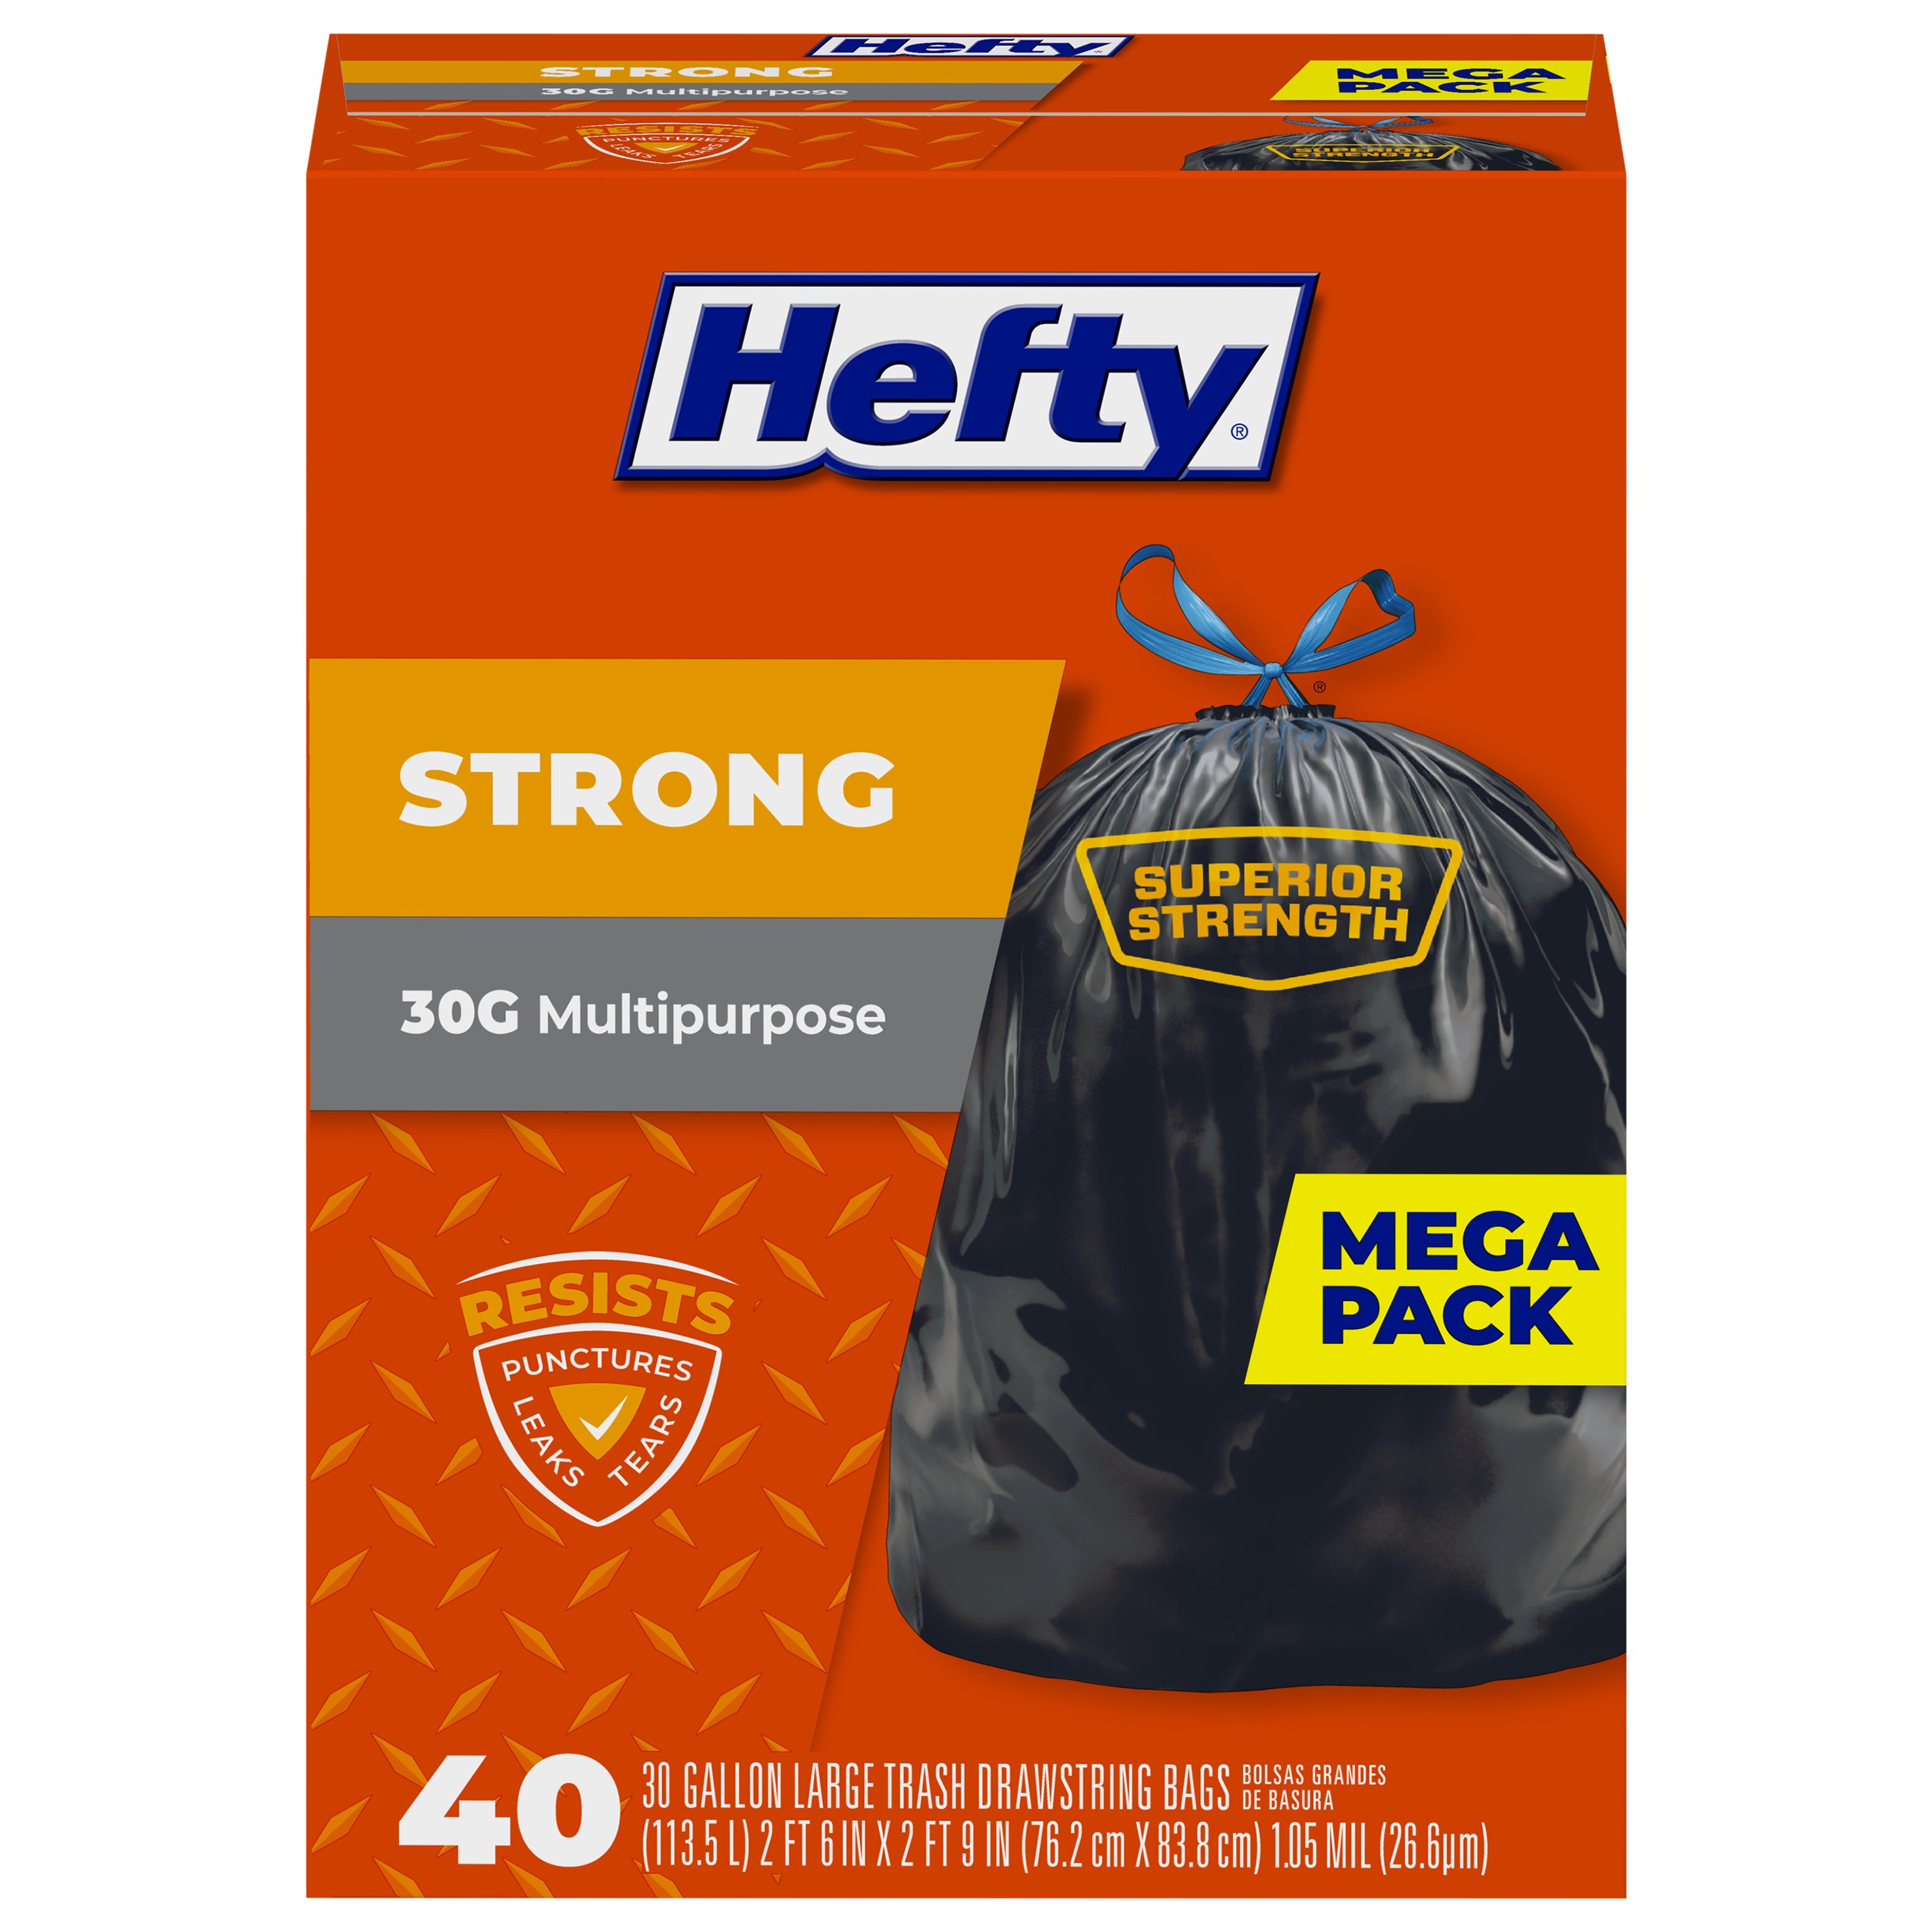 Hefty Strong Extra Large Trash Can Liner Drawstring Bags 33 Gallon